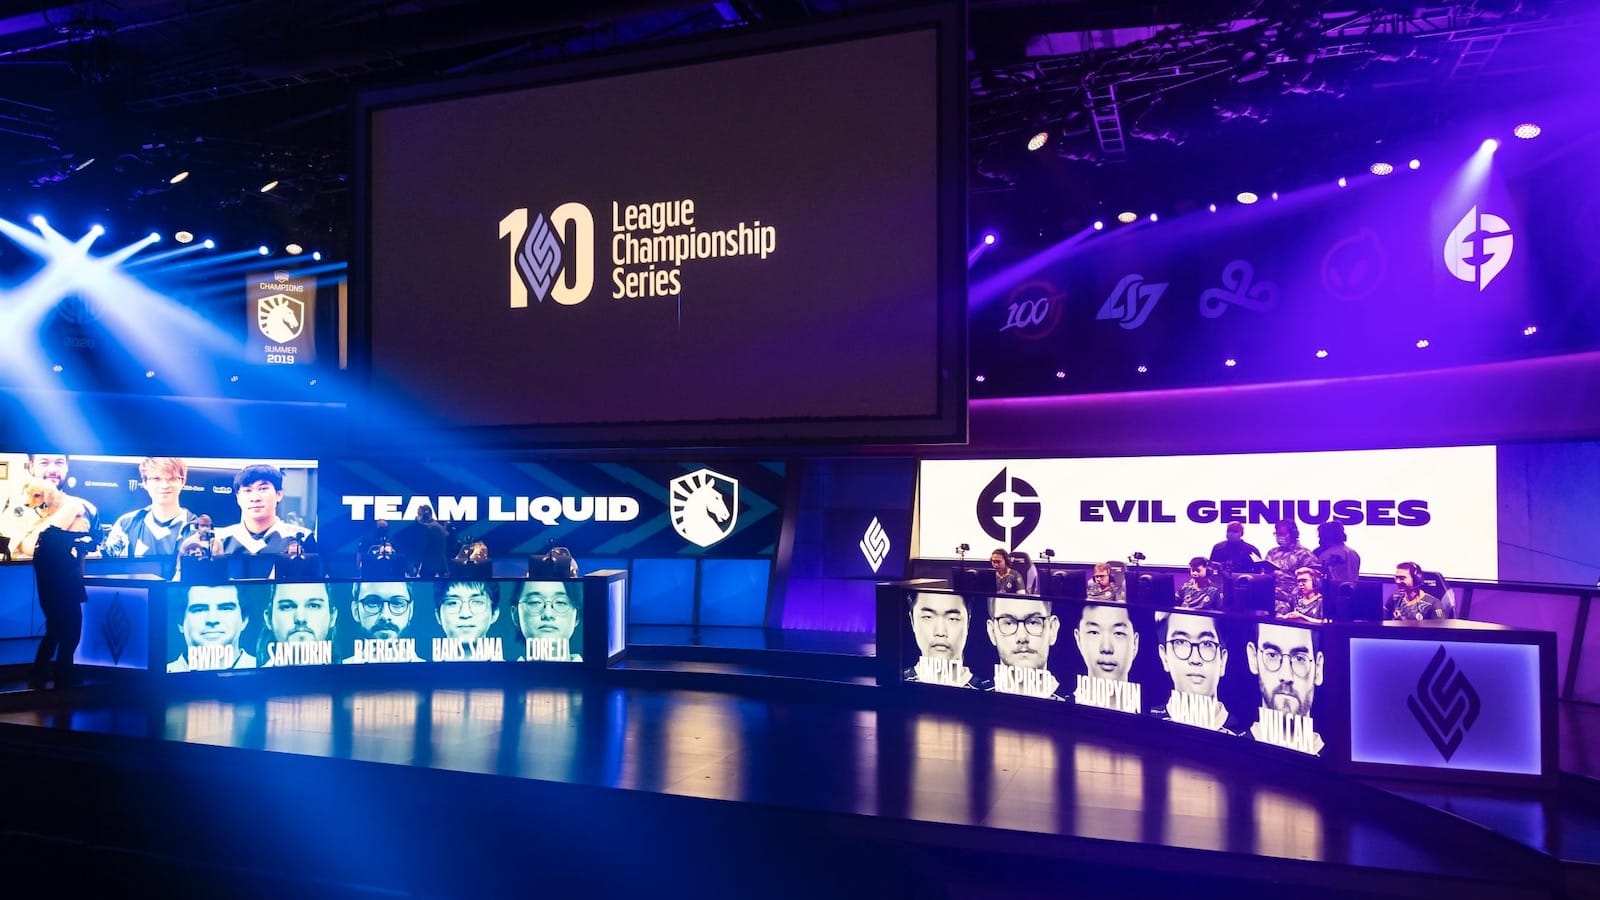 Home of the LCS (League of Legends Championship Series – North